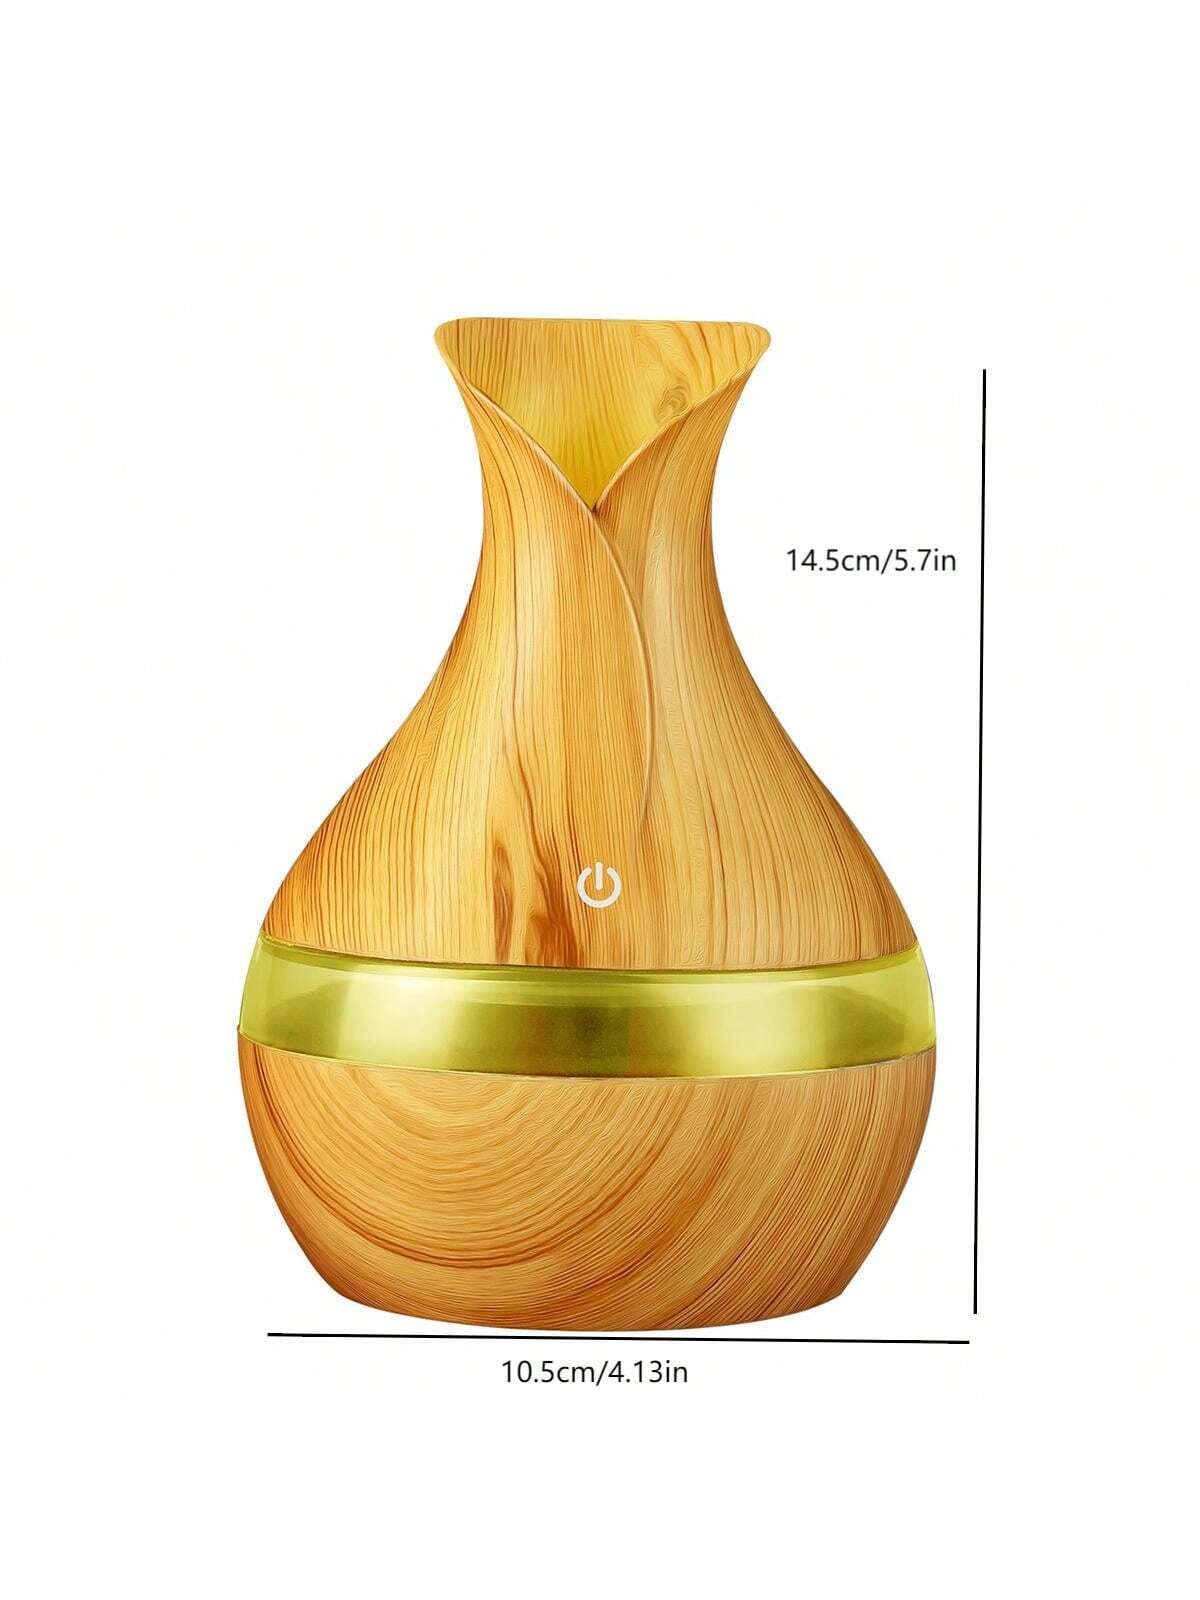 1pc Portable Desktop Usb Wood Grain Humidifier, Aroma Diffuser, Atomizer, Moisturizer, Air Purifier With Flower Vase Design, Suitable For Home, Bedroom, Outdoor, Travel-light wood grain-8